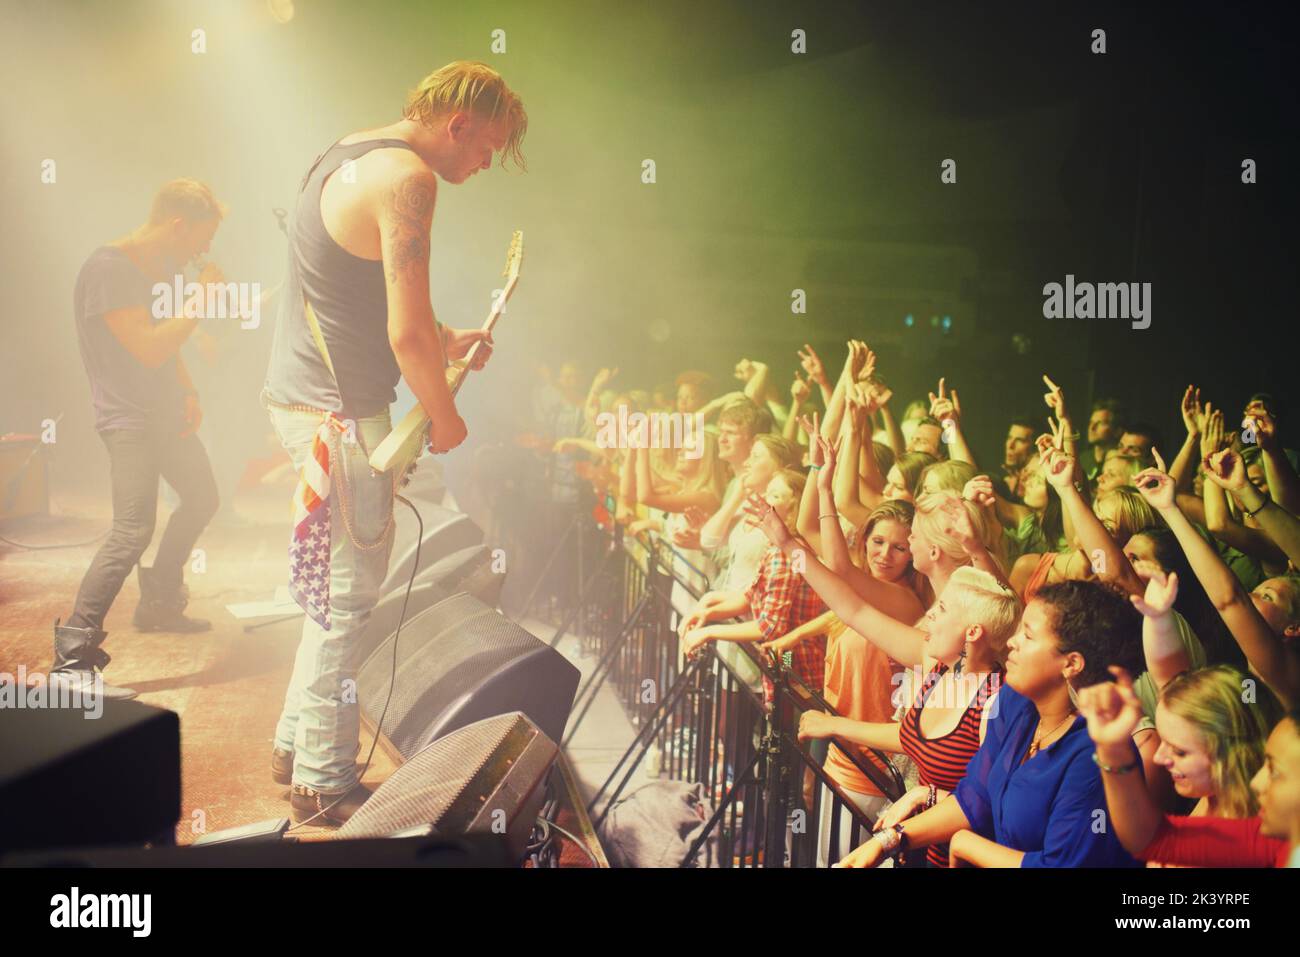 The most epic show of their lives. Young people getting into the music at an awesome concert. Stock Photo